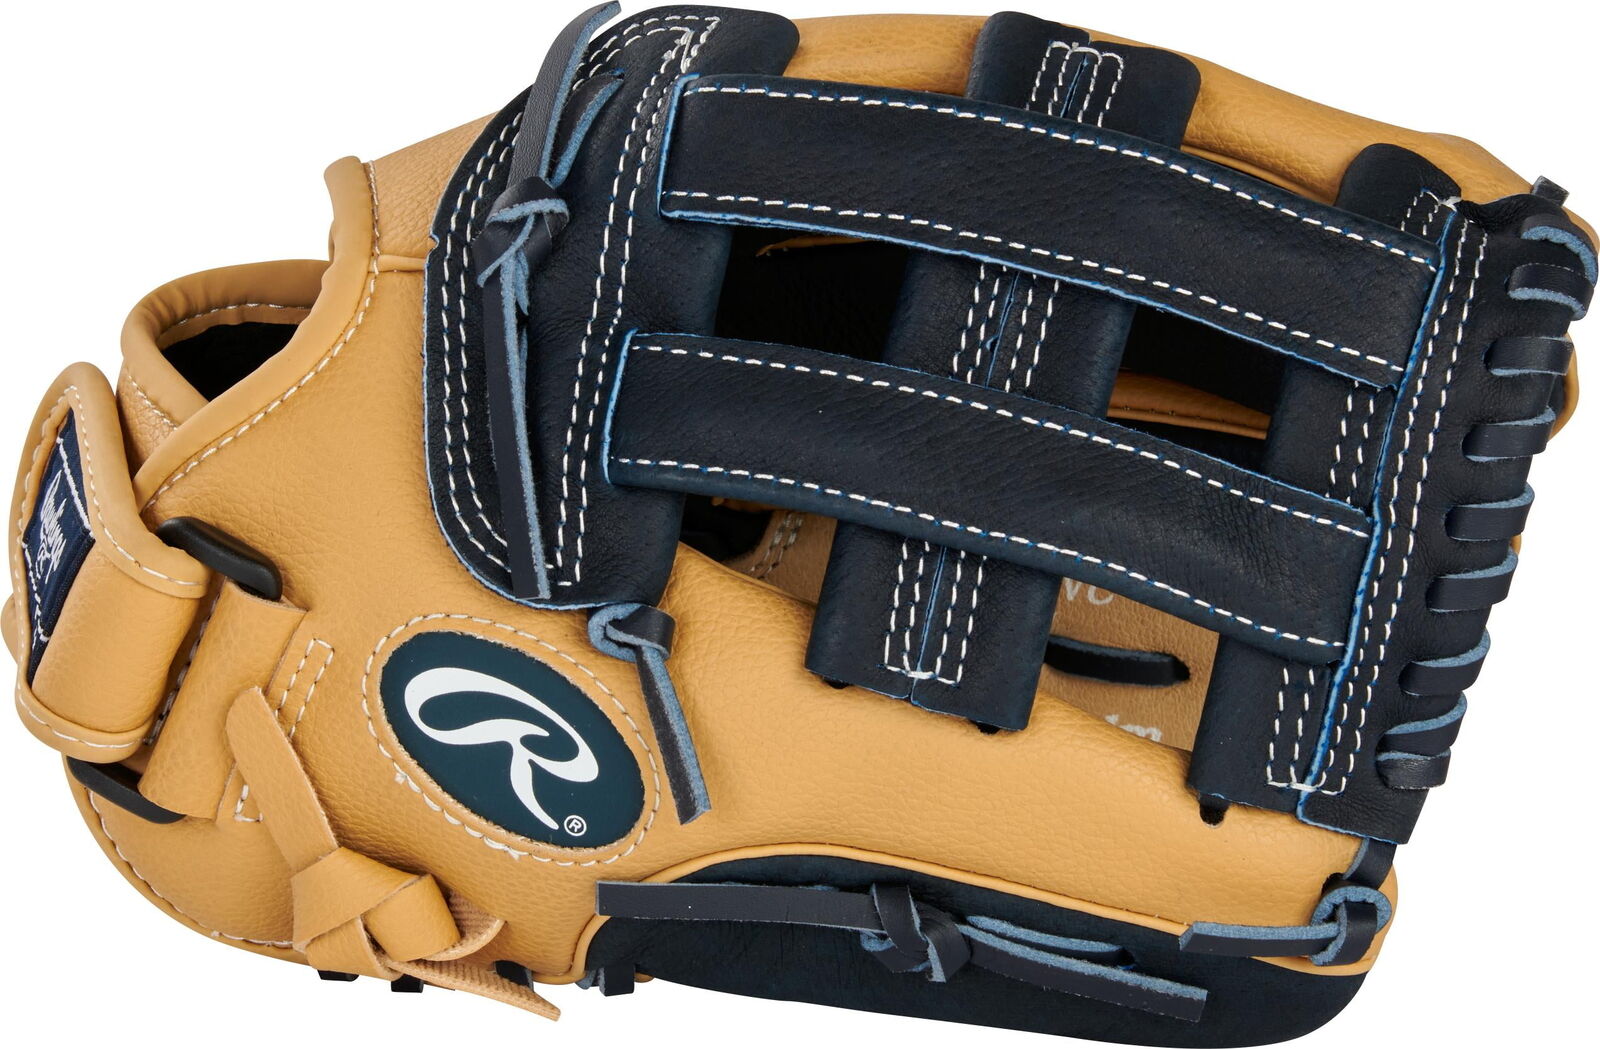 Playmaker Series Youth Baseball Glove, Camel/Navy, 11.5 inch, Right Hand Throw